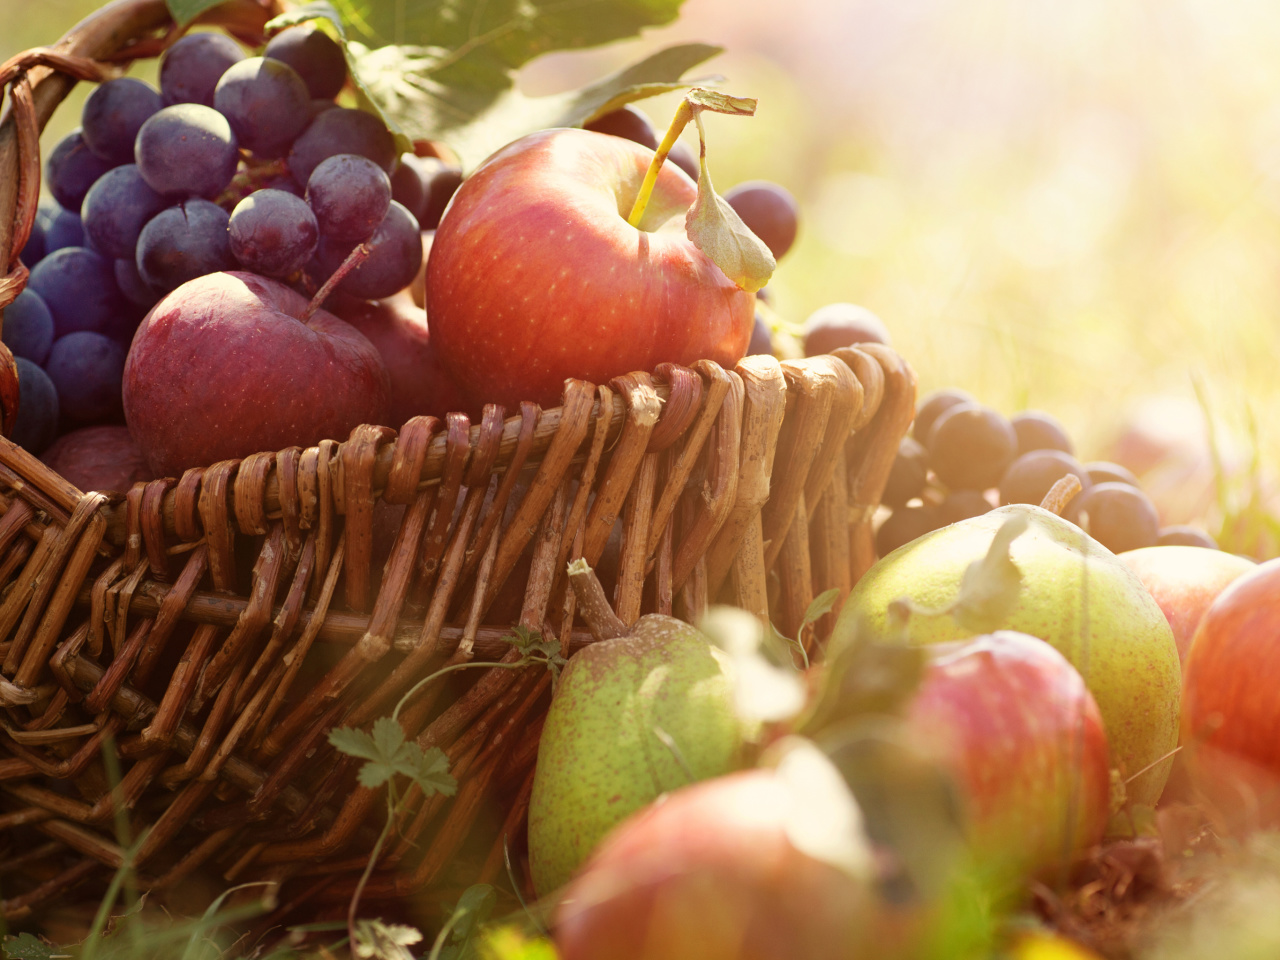 Apples and Grapes wallpaper 1280x960